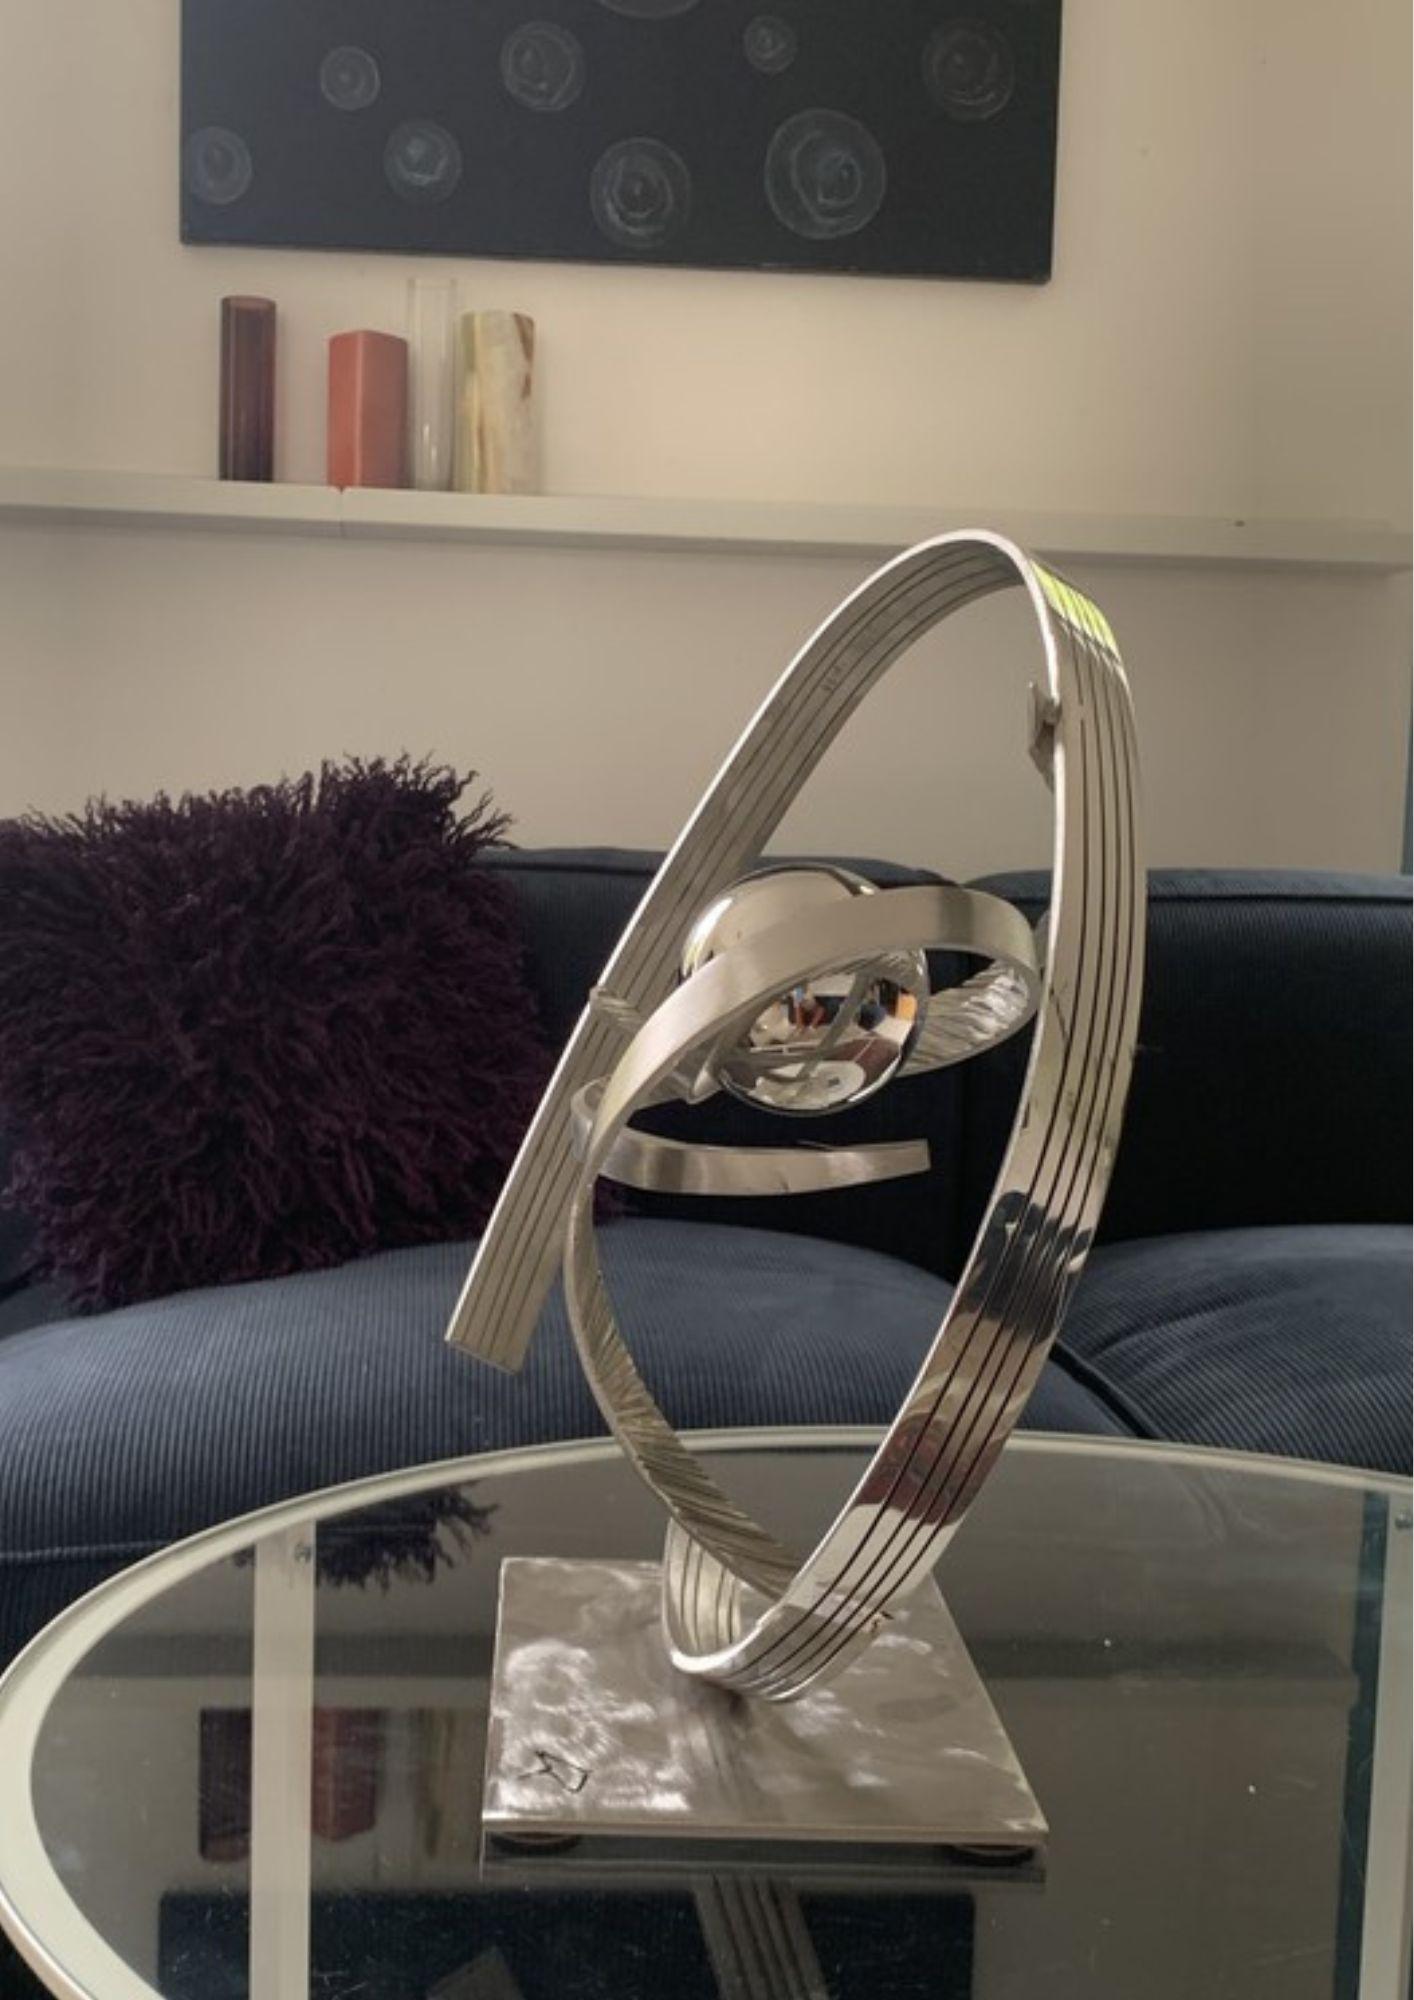 The sculpture Atomos 9 is a stainless steel work that captures the essence of matter and energy. With her fine and light curves, she explores the notions of balance and movement in a space where reality and illusion meet.

The artist is inspired by